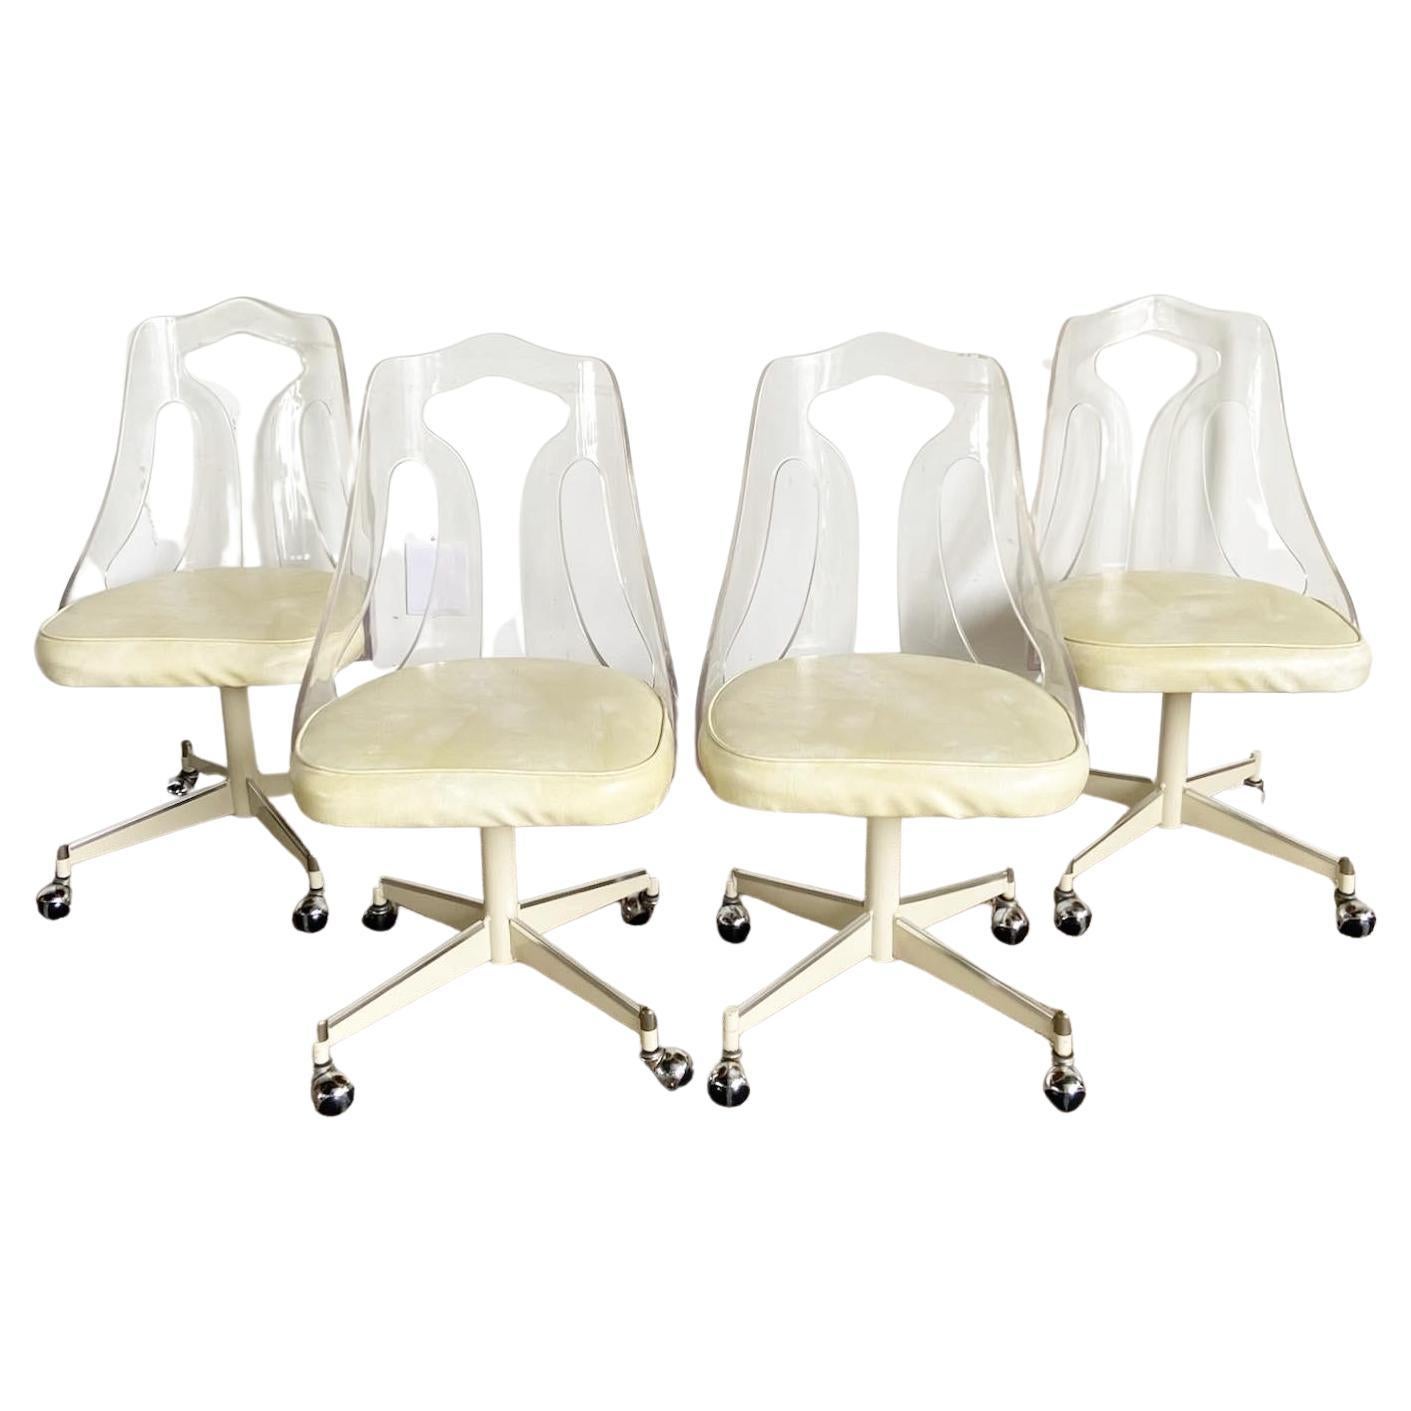 Mid Century Modern Lucite Back Cream Cushion and Metal Dining Chairs - 4 Chairs